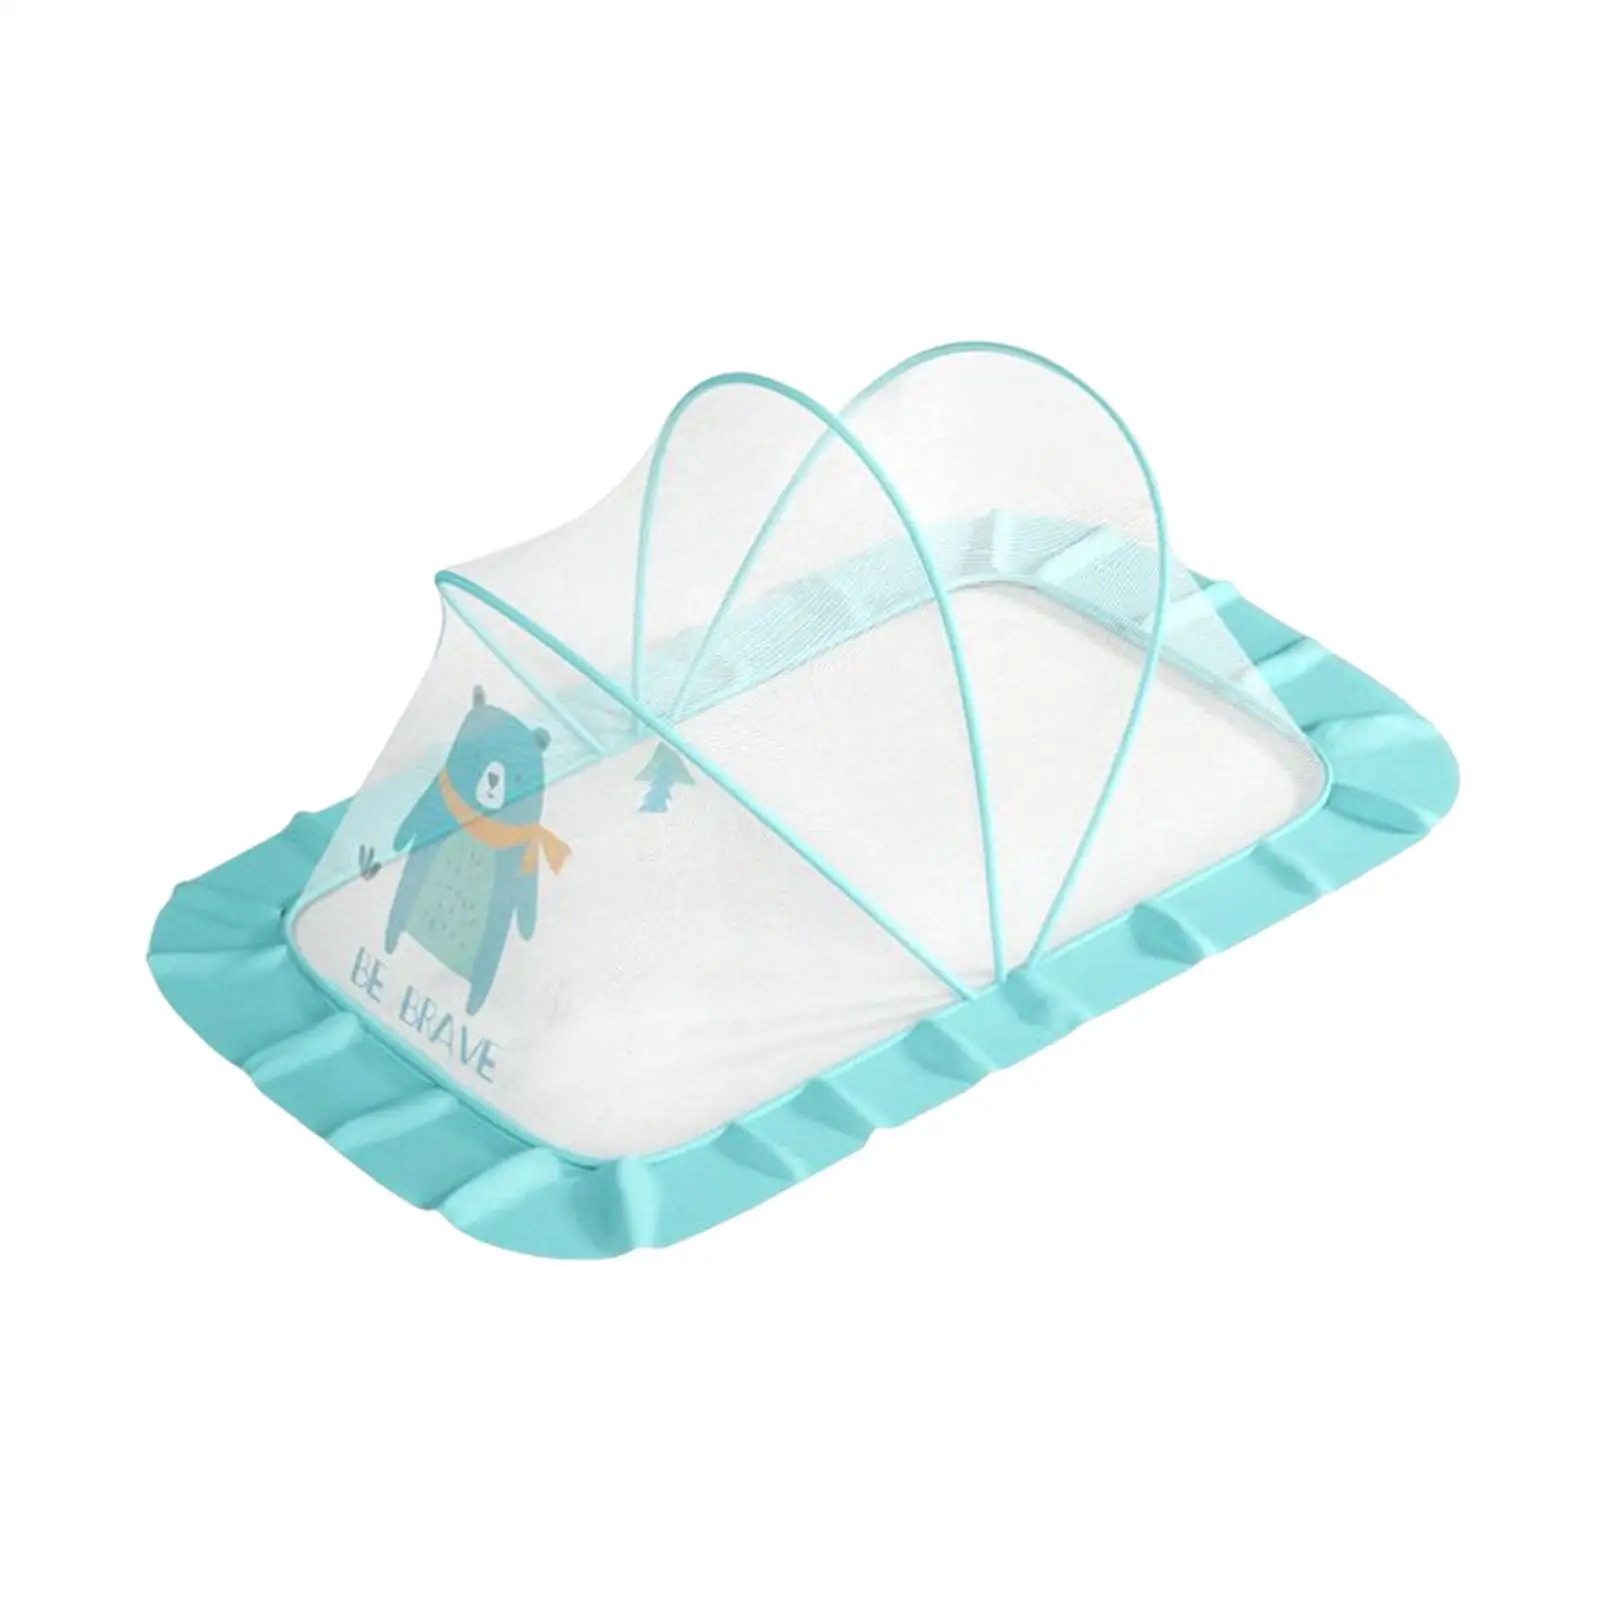 Portable Net Tent High Density Grids Bed Cover Lightweight Bottomless Folding for Carpets Baby Toddlers